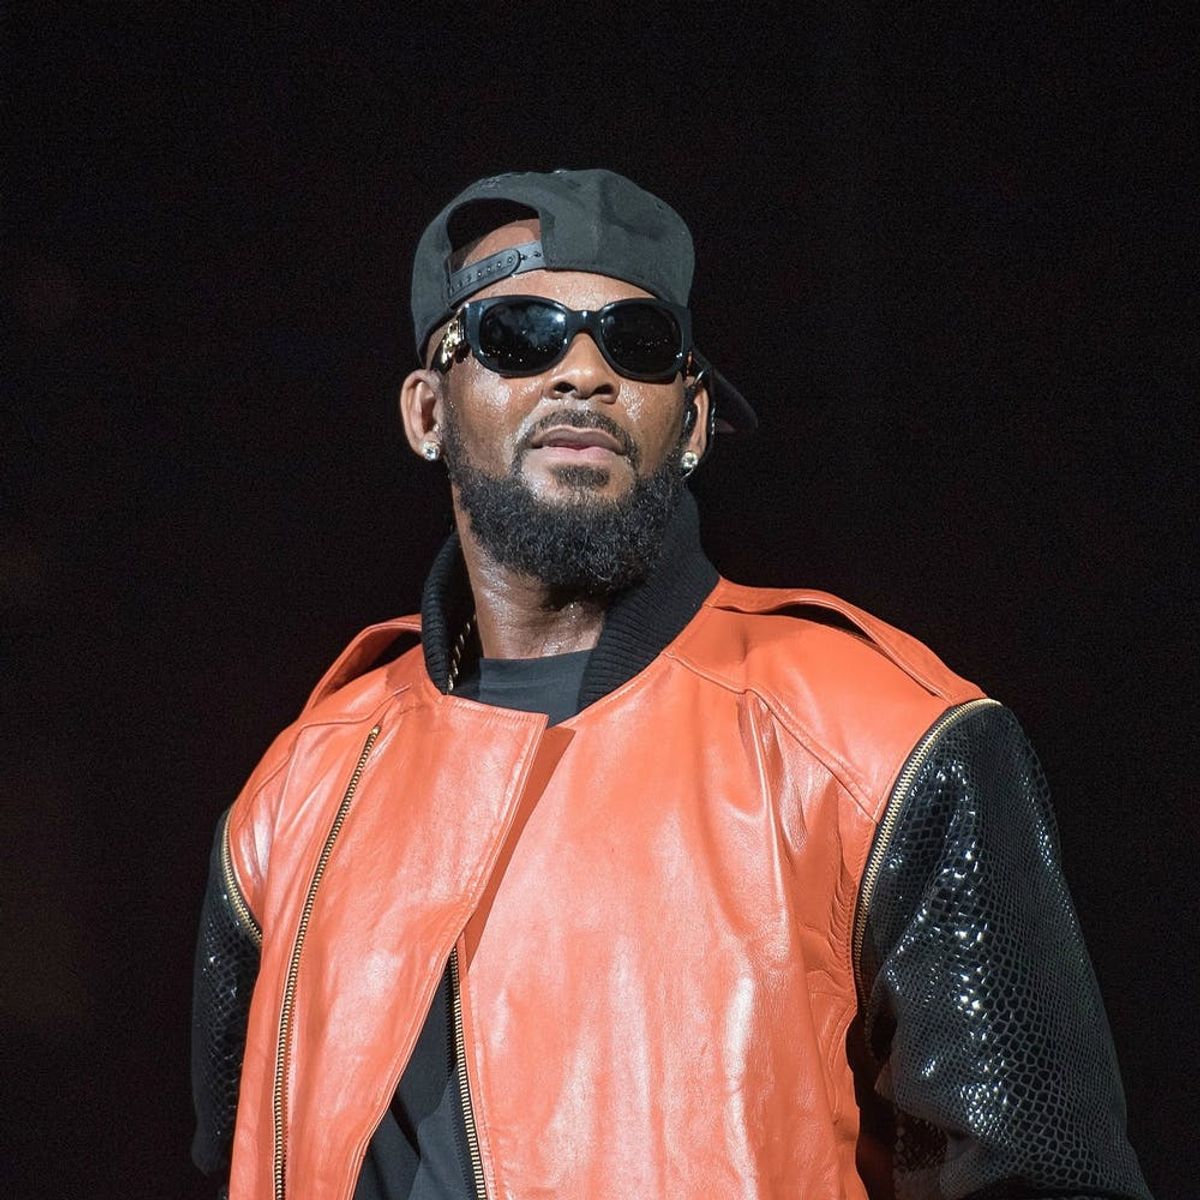 Sony and R. Kelly Have Reportedly Parted Ways